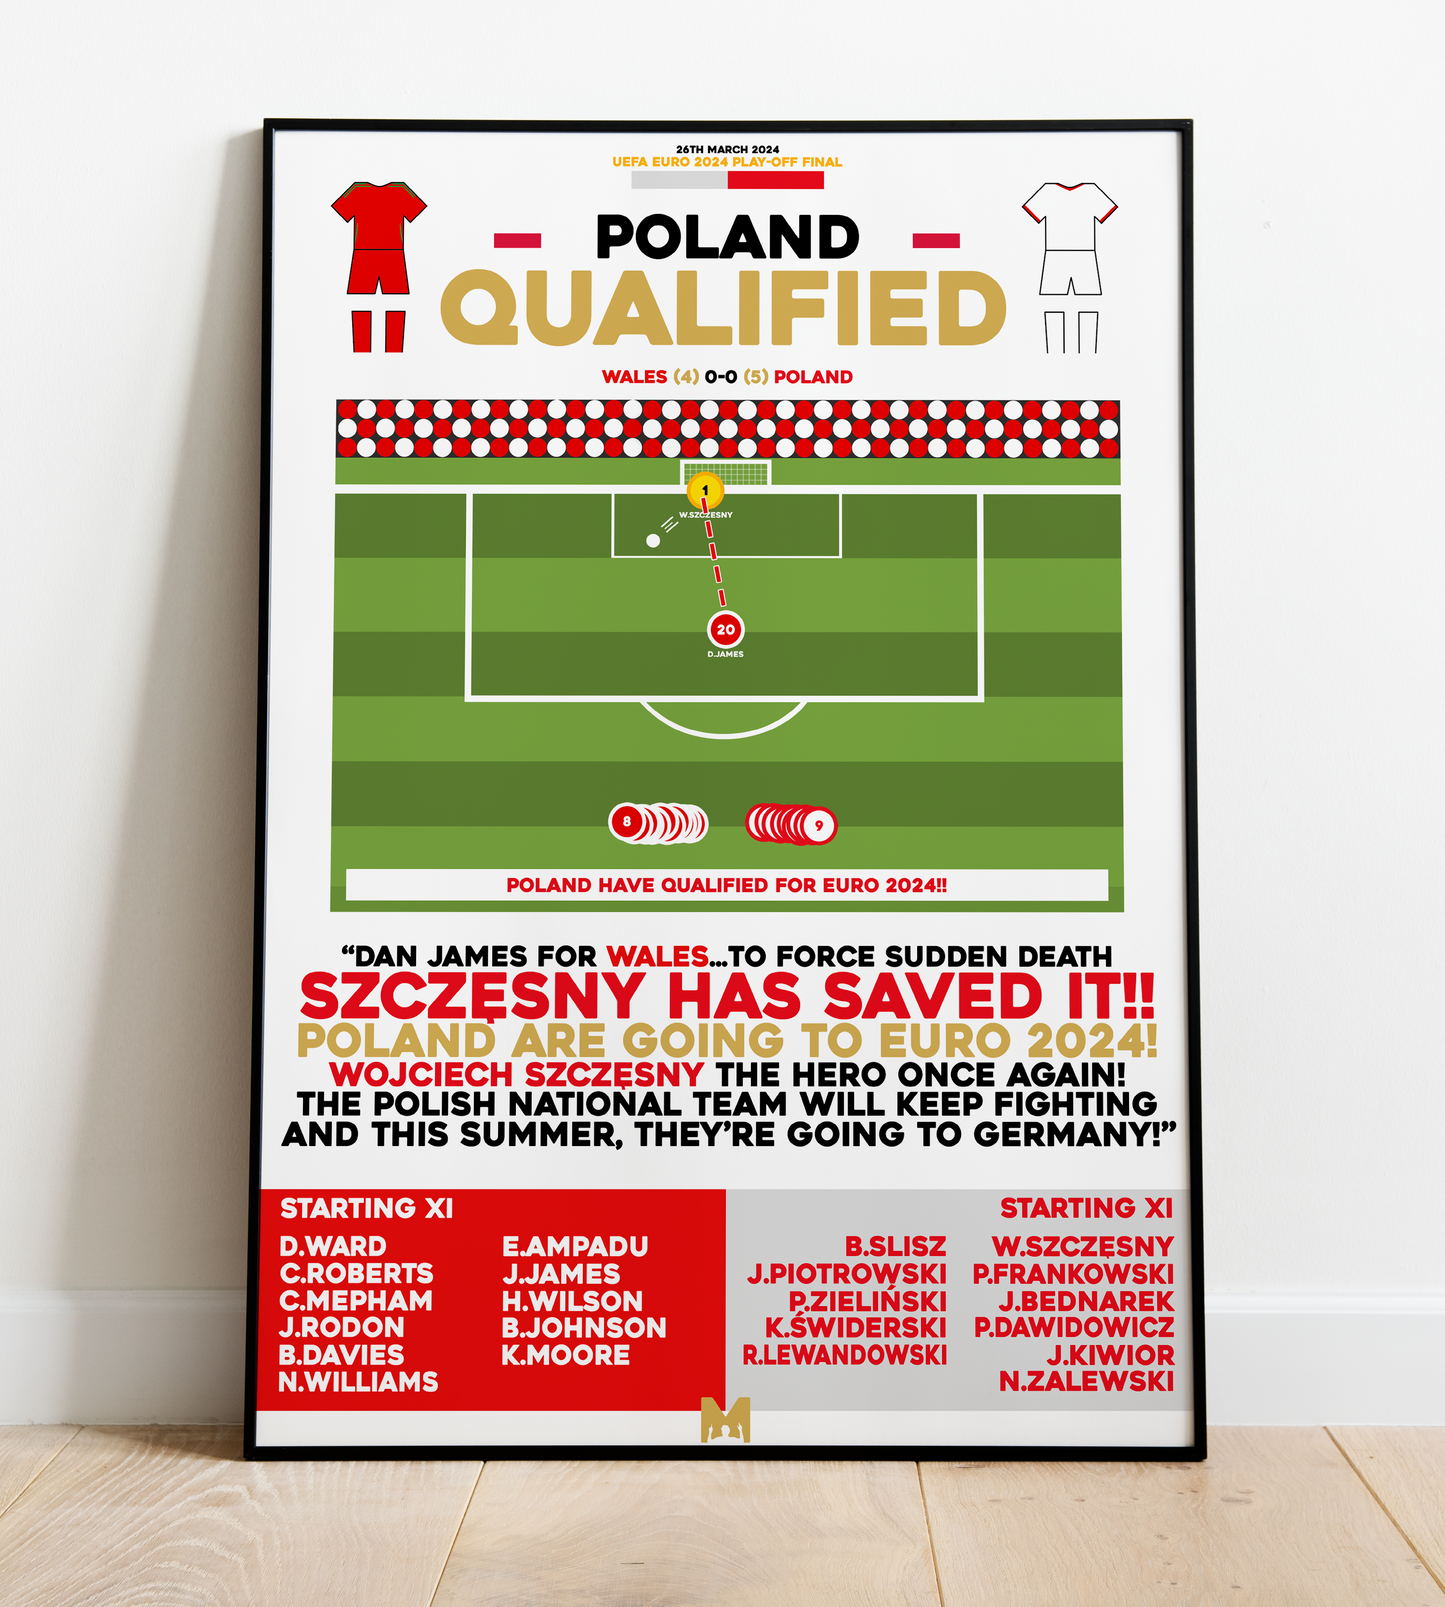 Poland Qualified vs Wales - Euro 2024 Play-Off Final - Poland